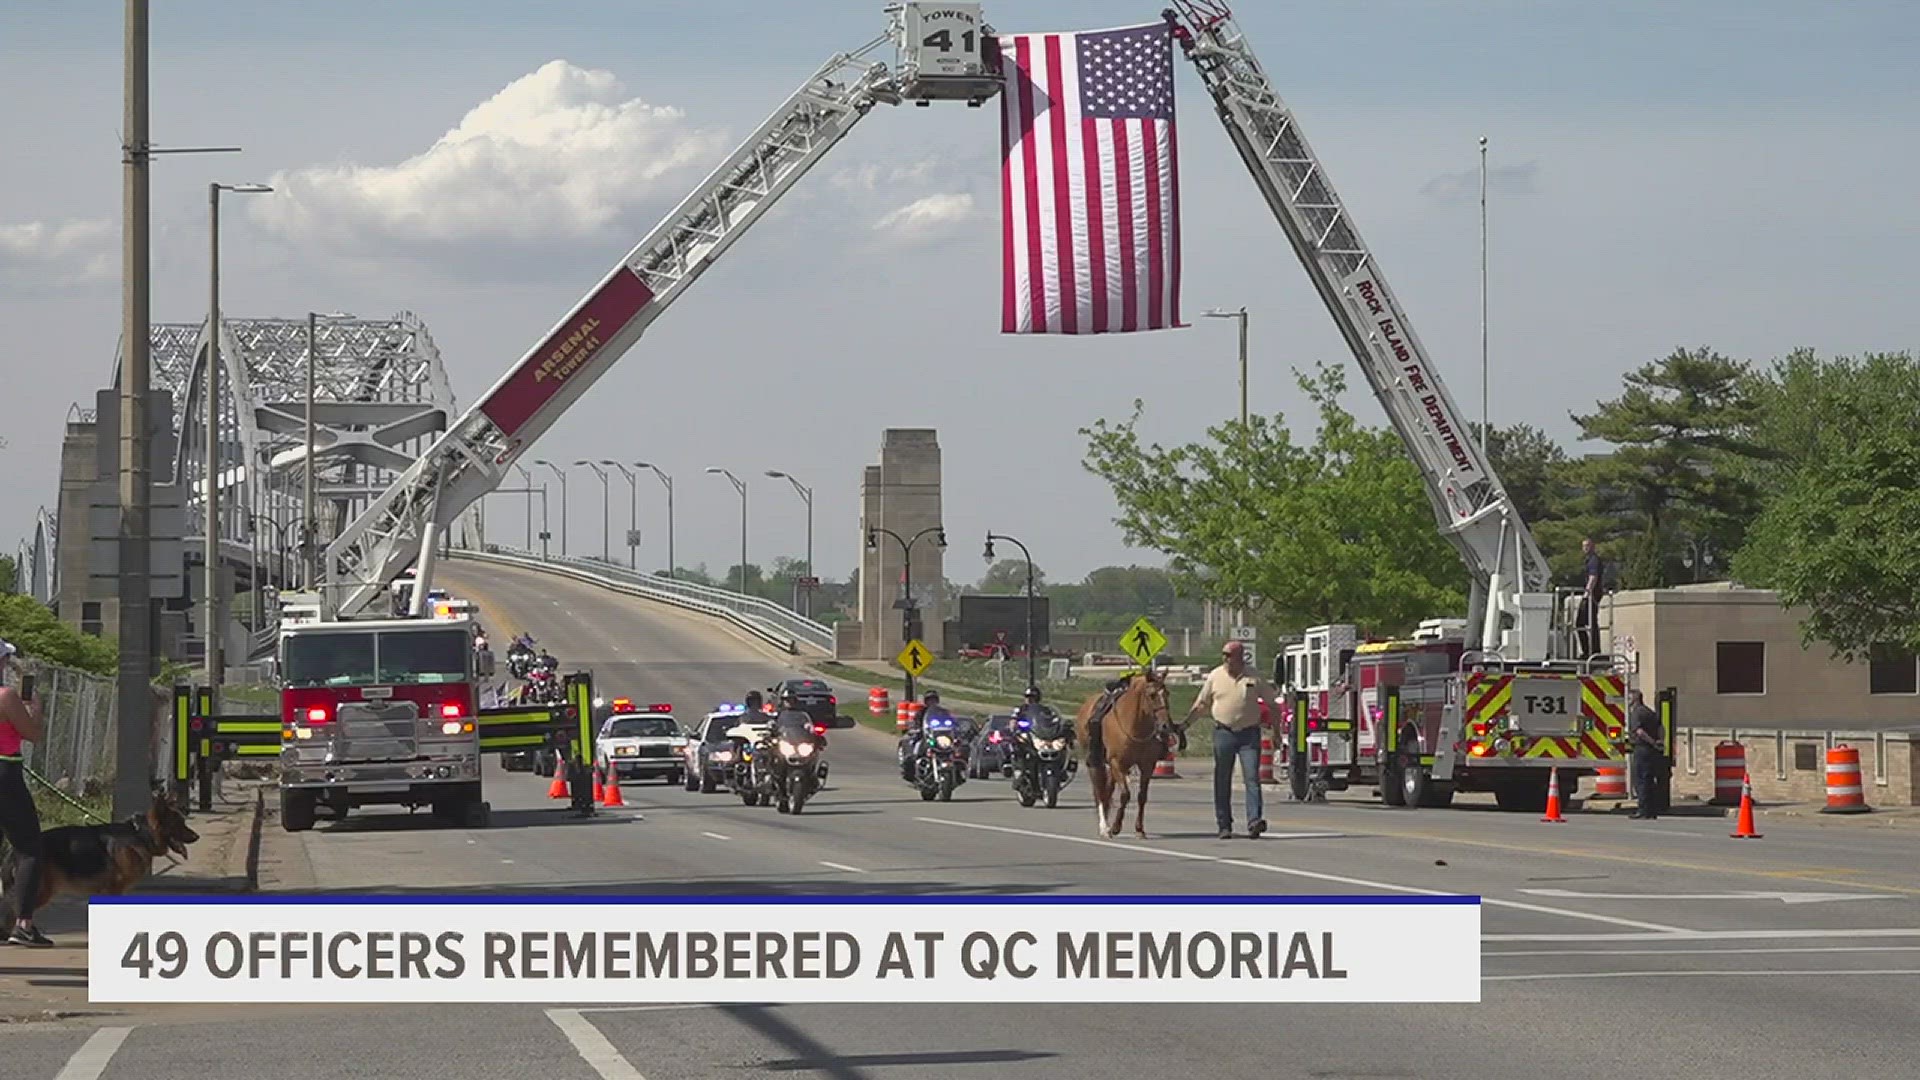 The ceremony recognized officers killed in the line of duty, tracing back over a century from departments in a 50-mile radius of the Quad Cities.